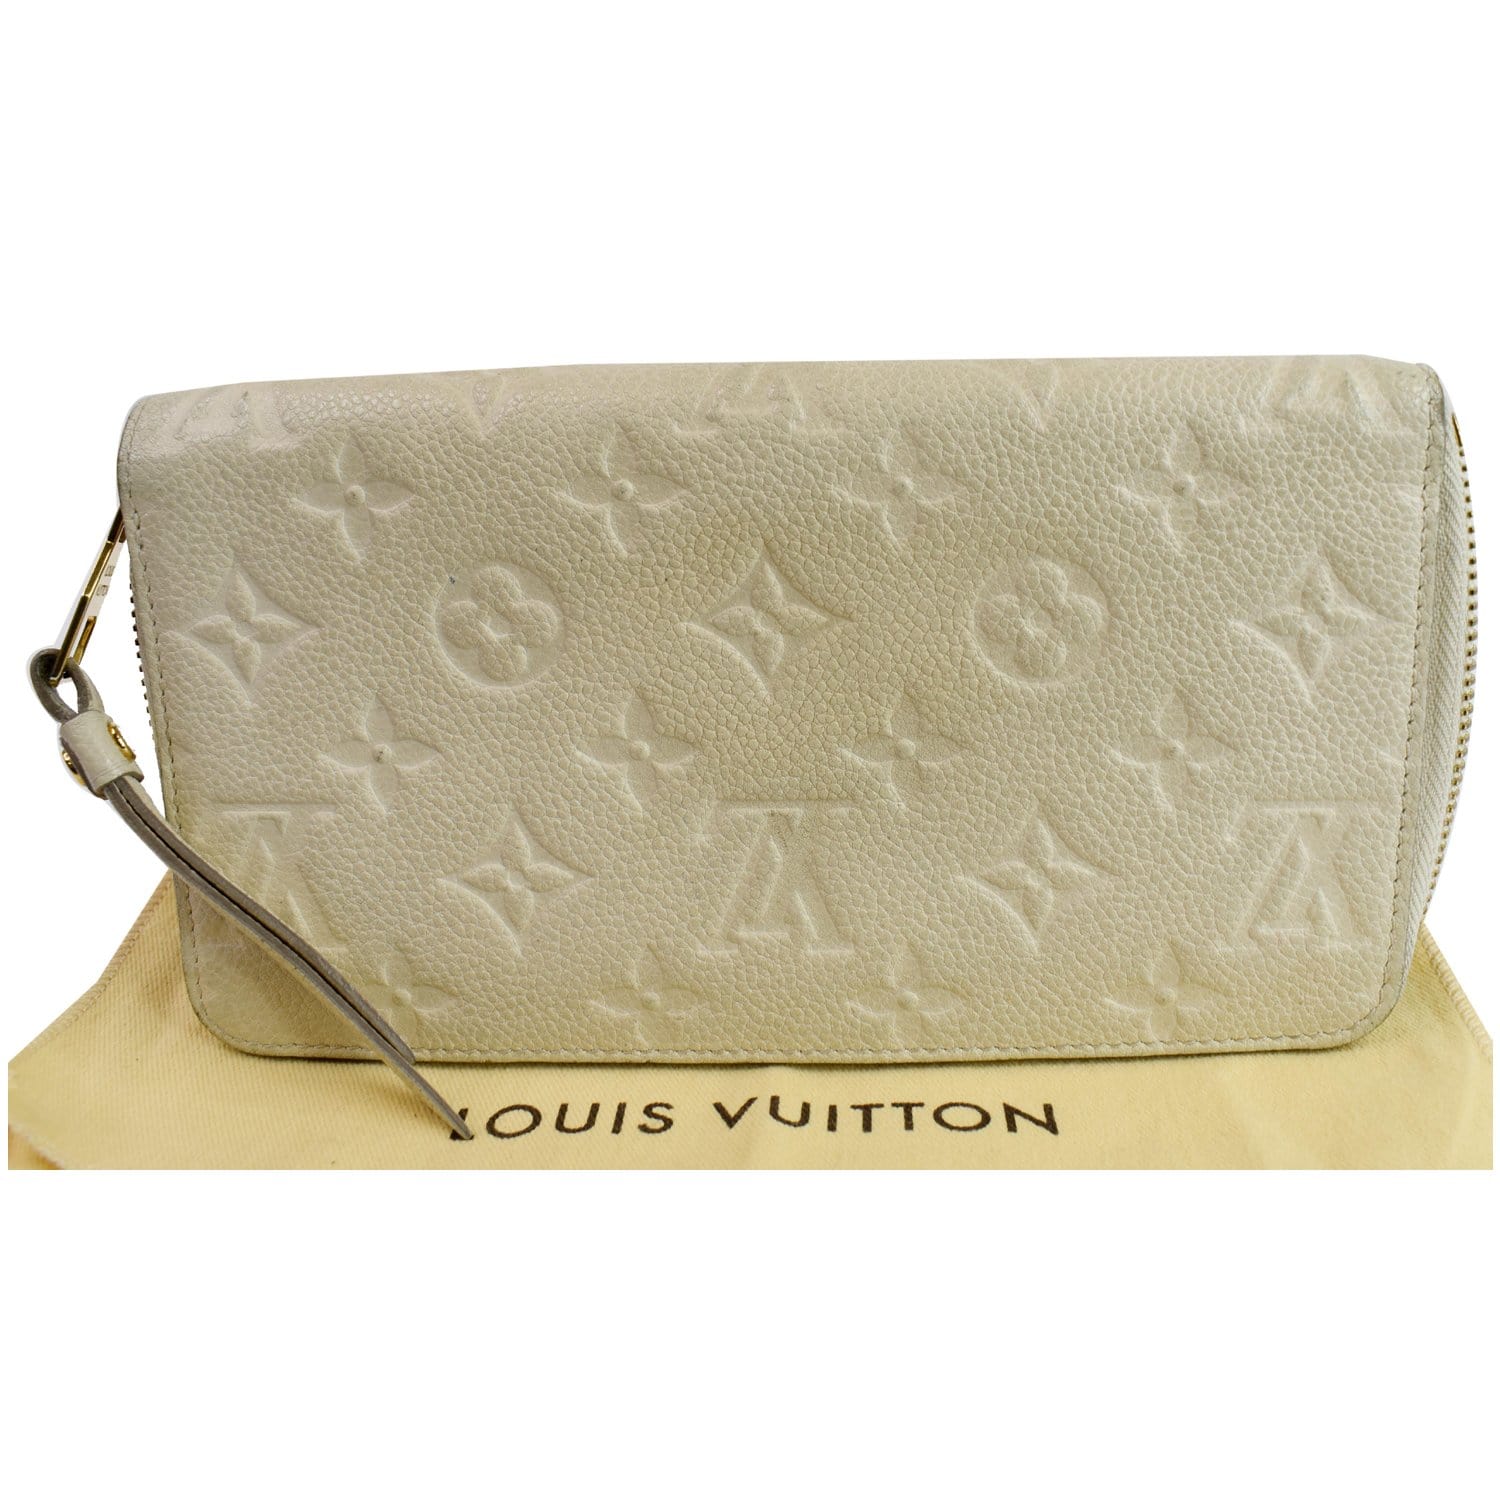 white leather louis vuittons wallet